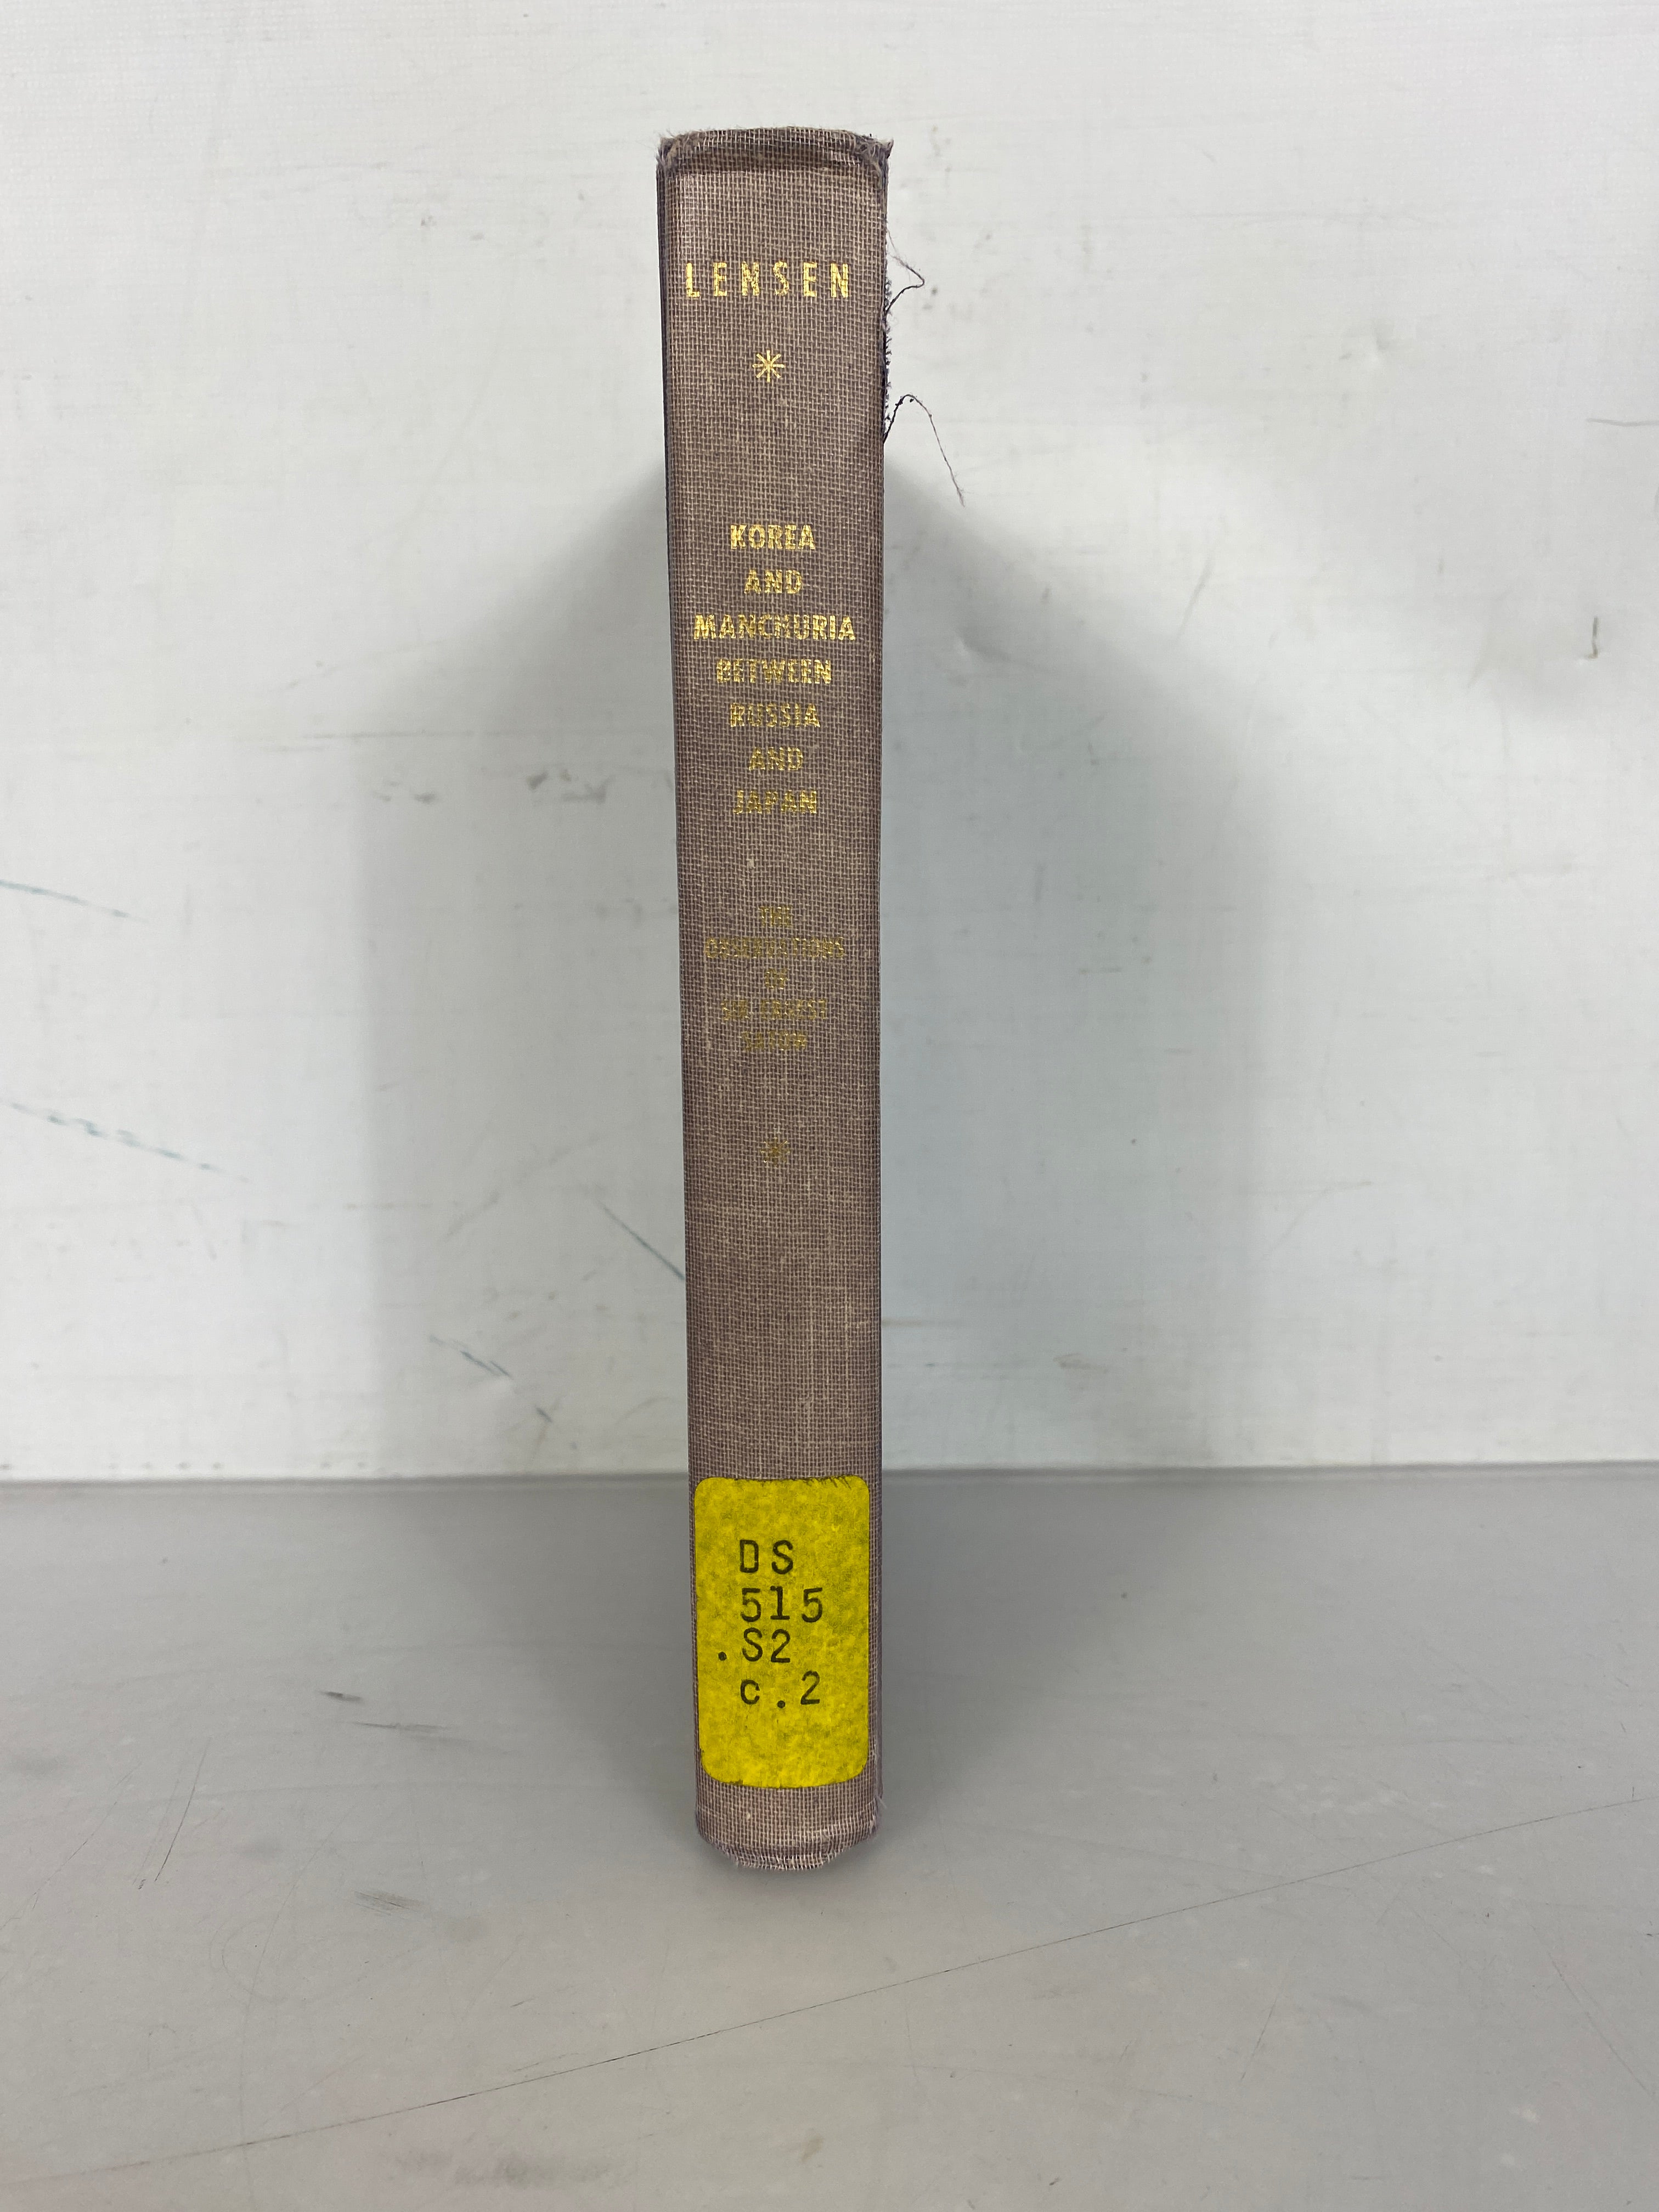 Korea and Manchuria Between Russia and Japan 1895-1904 by Lensen 1966 1st Ed HC